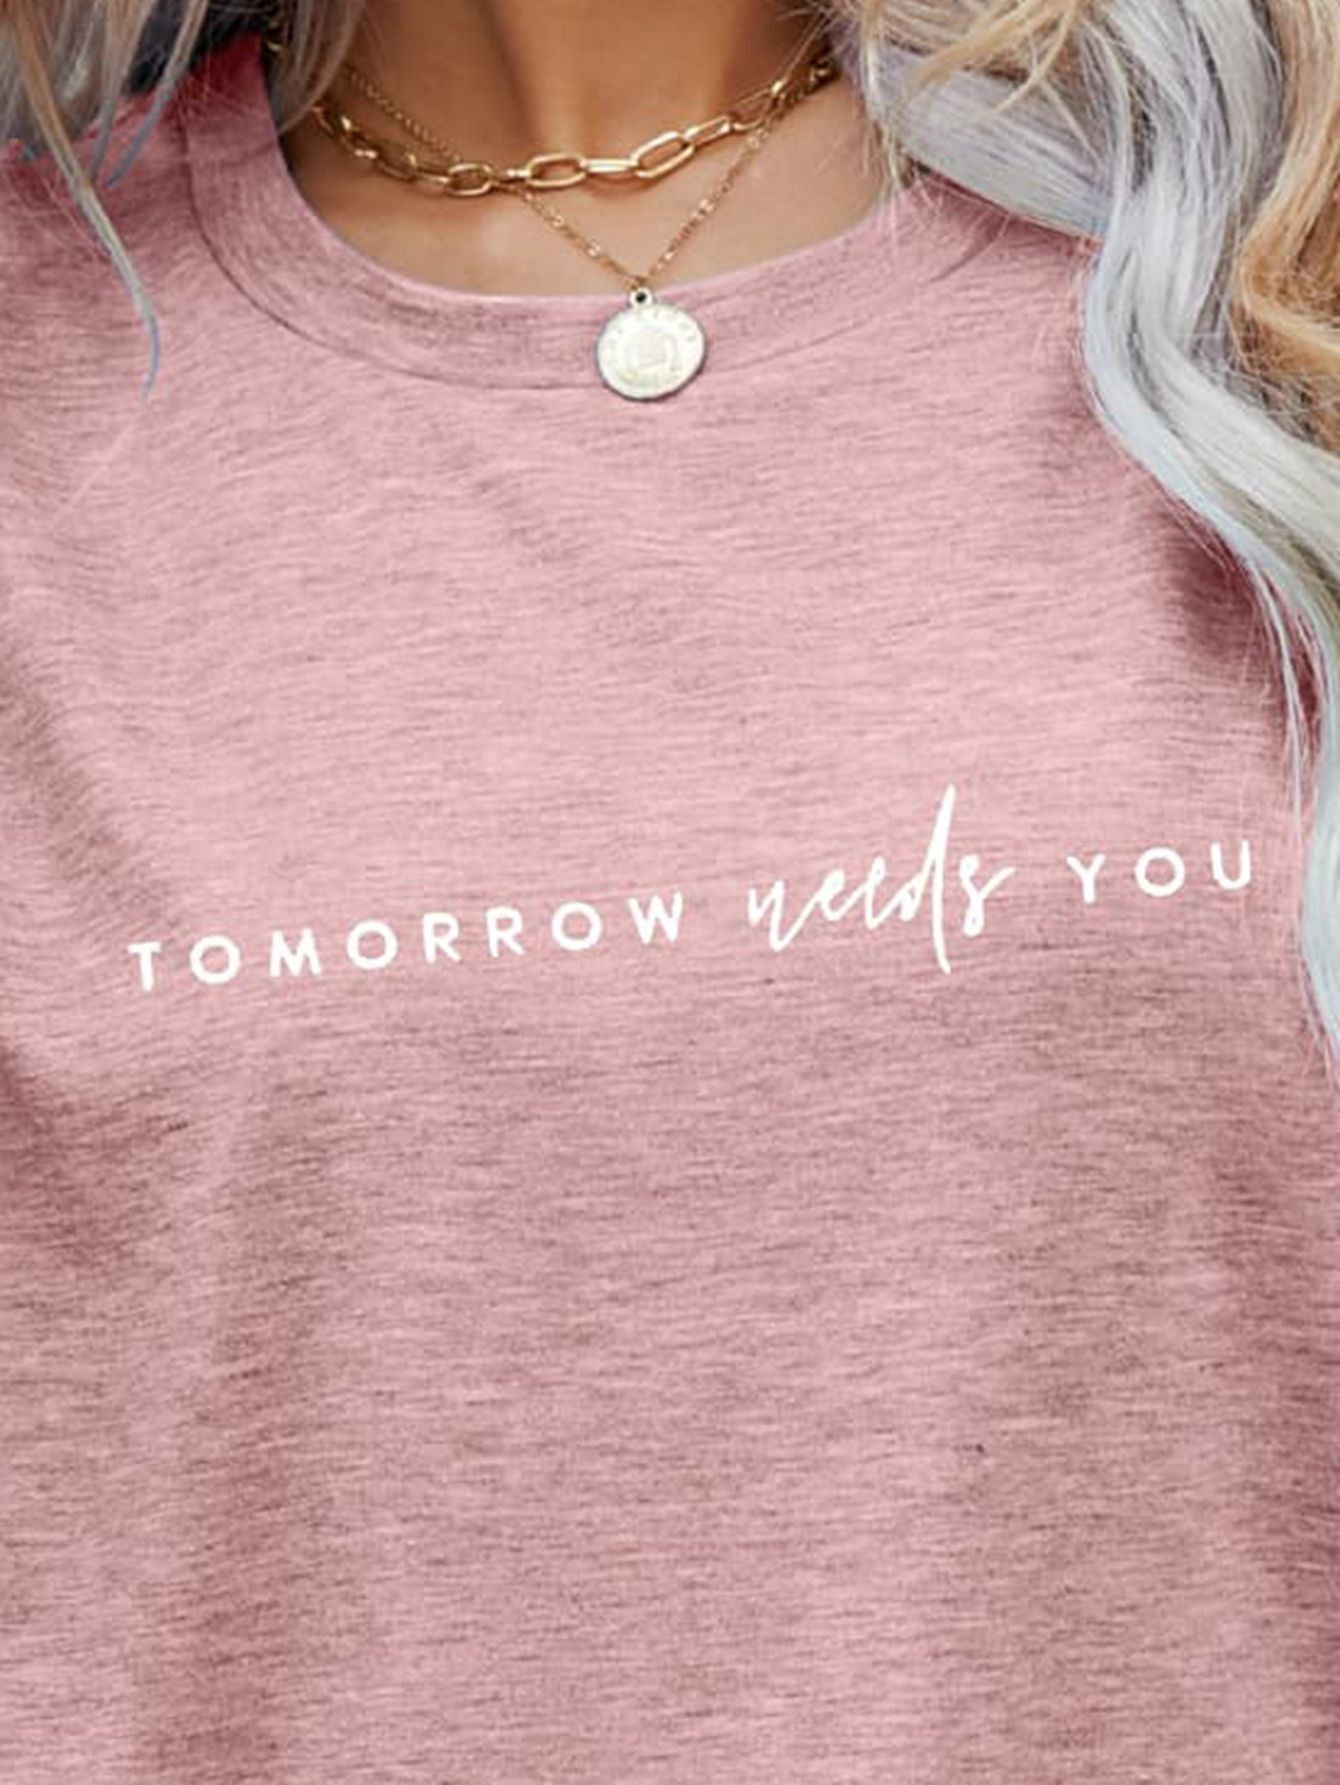 Rosy Brown Tomorrow Needs You Graphic Tee Sentient Beauty Fashions Apparel & Accessories